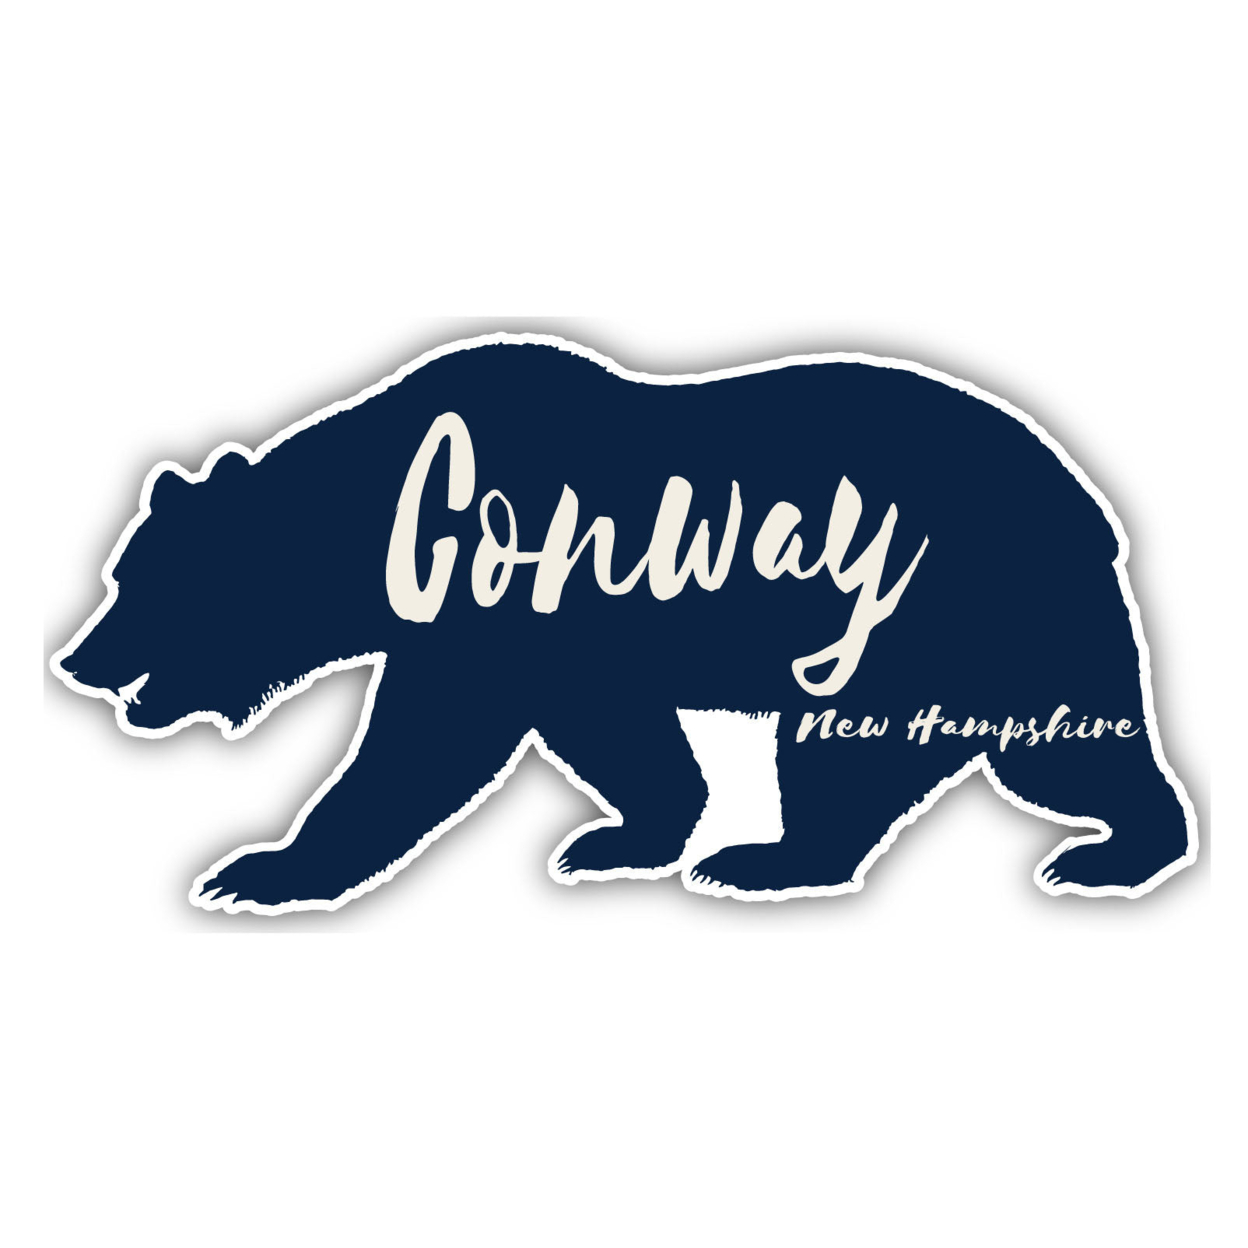 Conway New Hampshire Souvenir Decorative Stickers (Choose Theme And Size) - Single Unit, 2-Inch, Great Outdoors